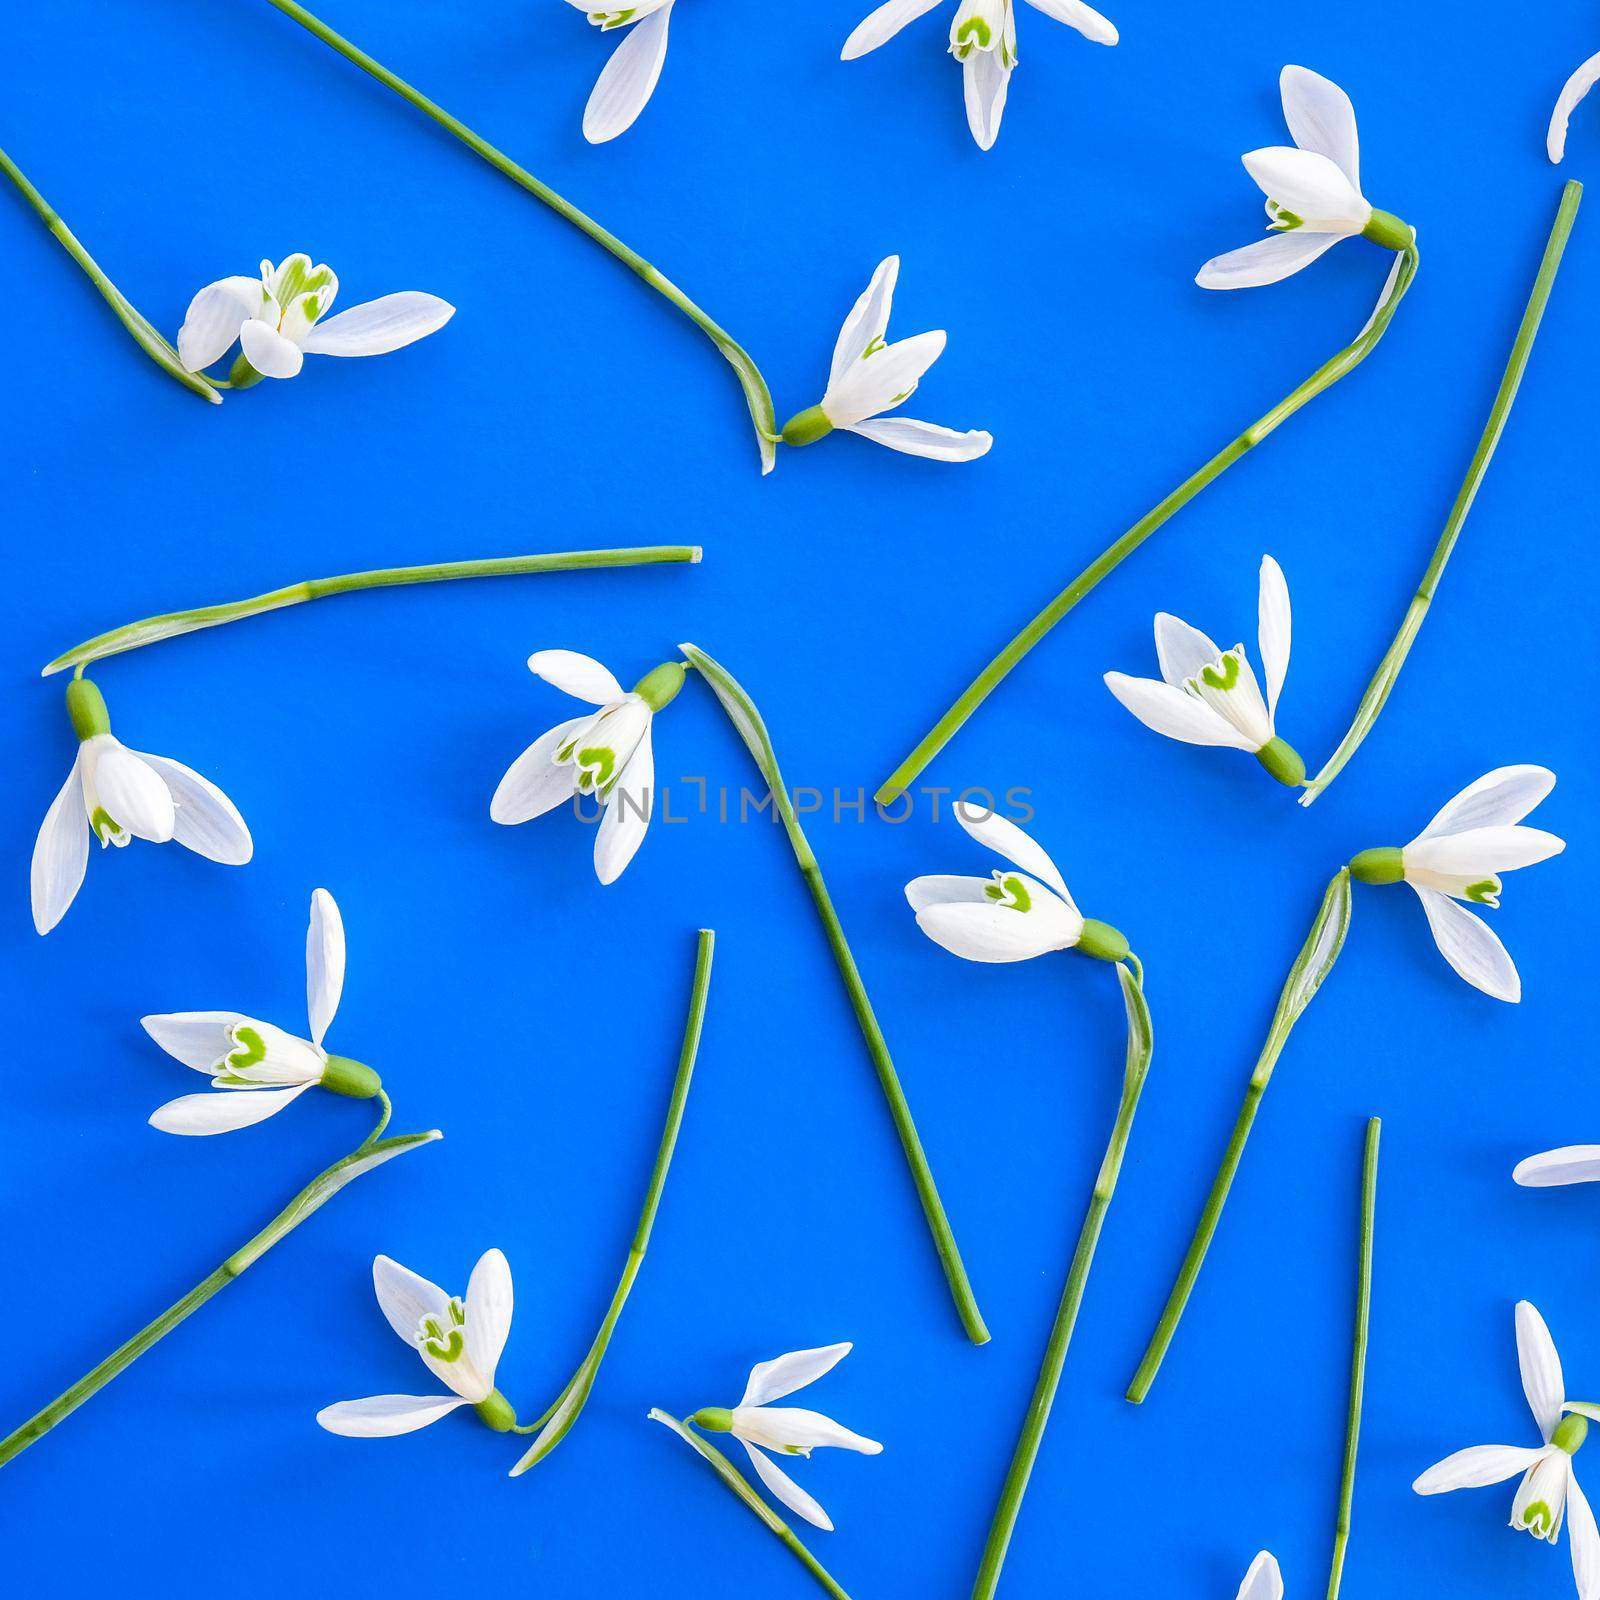 Snowdrop flower arranged on a blue background. Spring concept minimal pattern. Flat lay frame. by anna_stasiia